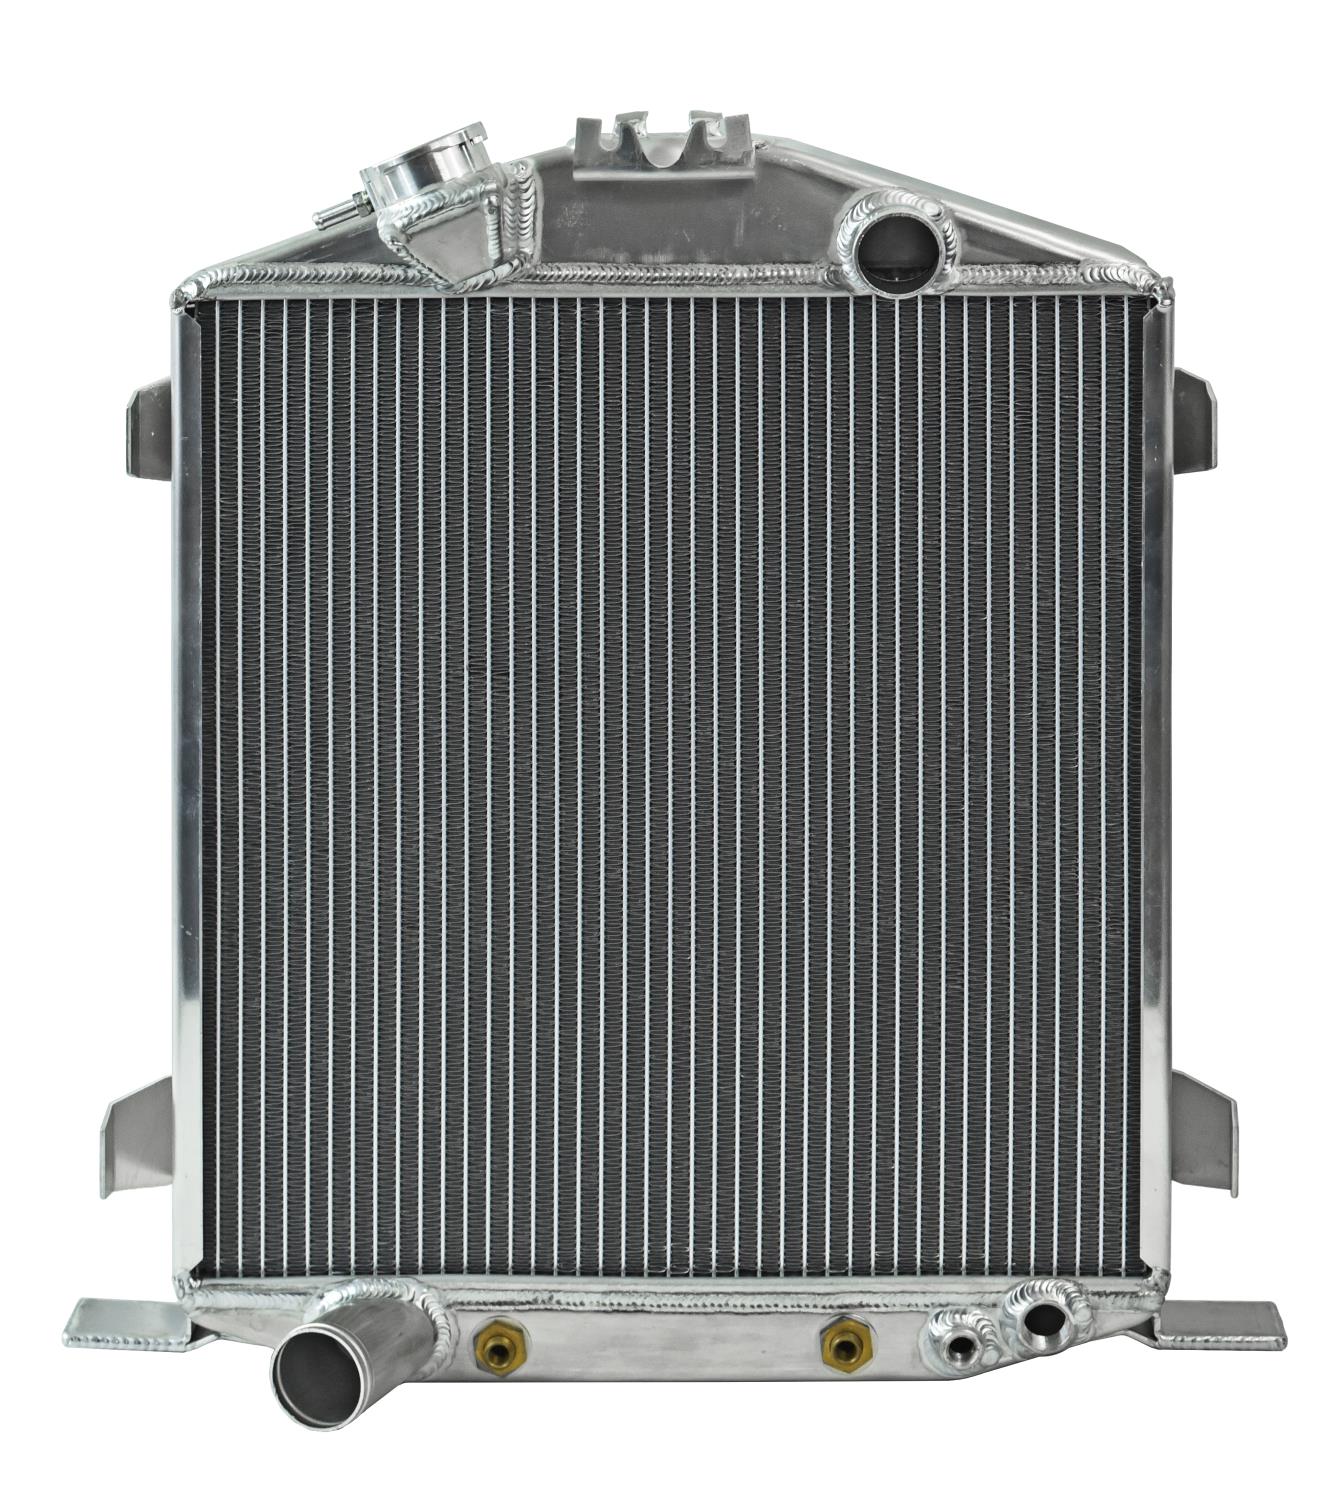 Aluminum Radiator for 1932 Ford LO-BOY with Ford V8 Engine and Chopped Grill